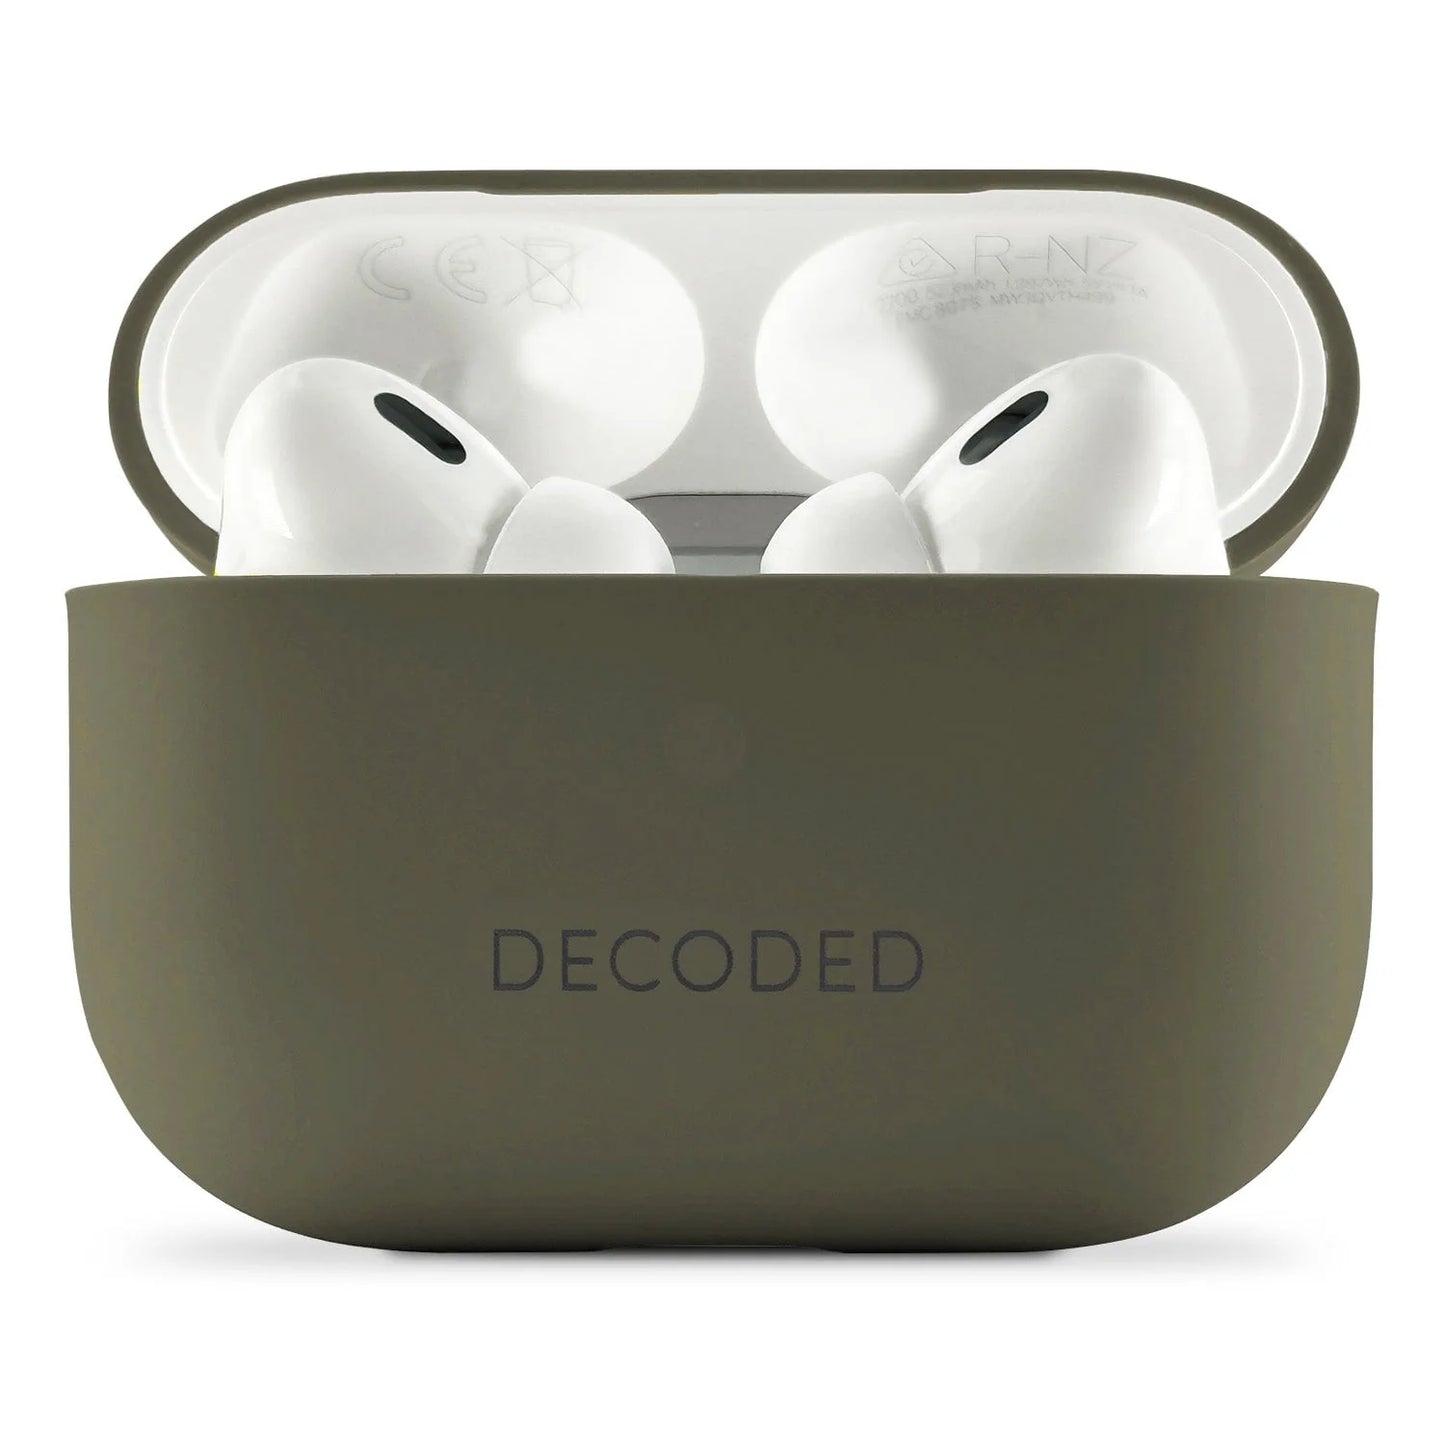 Decoded Silicone Aircase voor AirPods Pro (2e gen.) - Olive